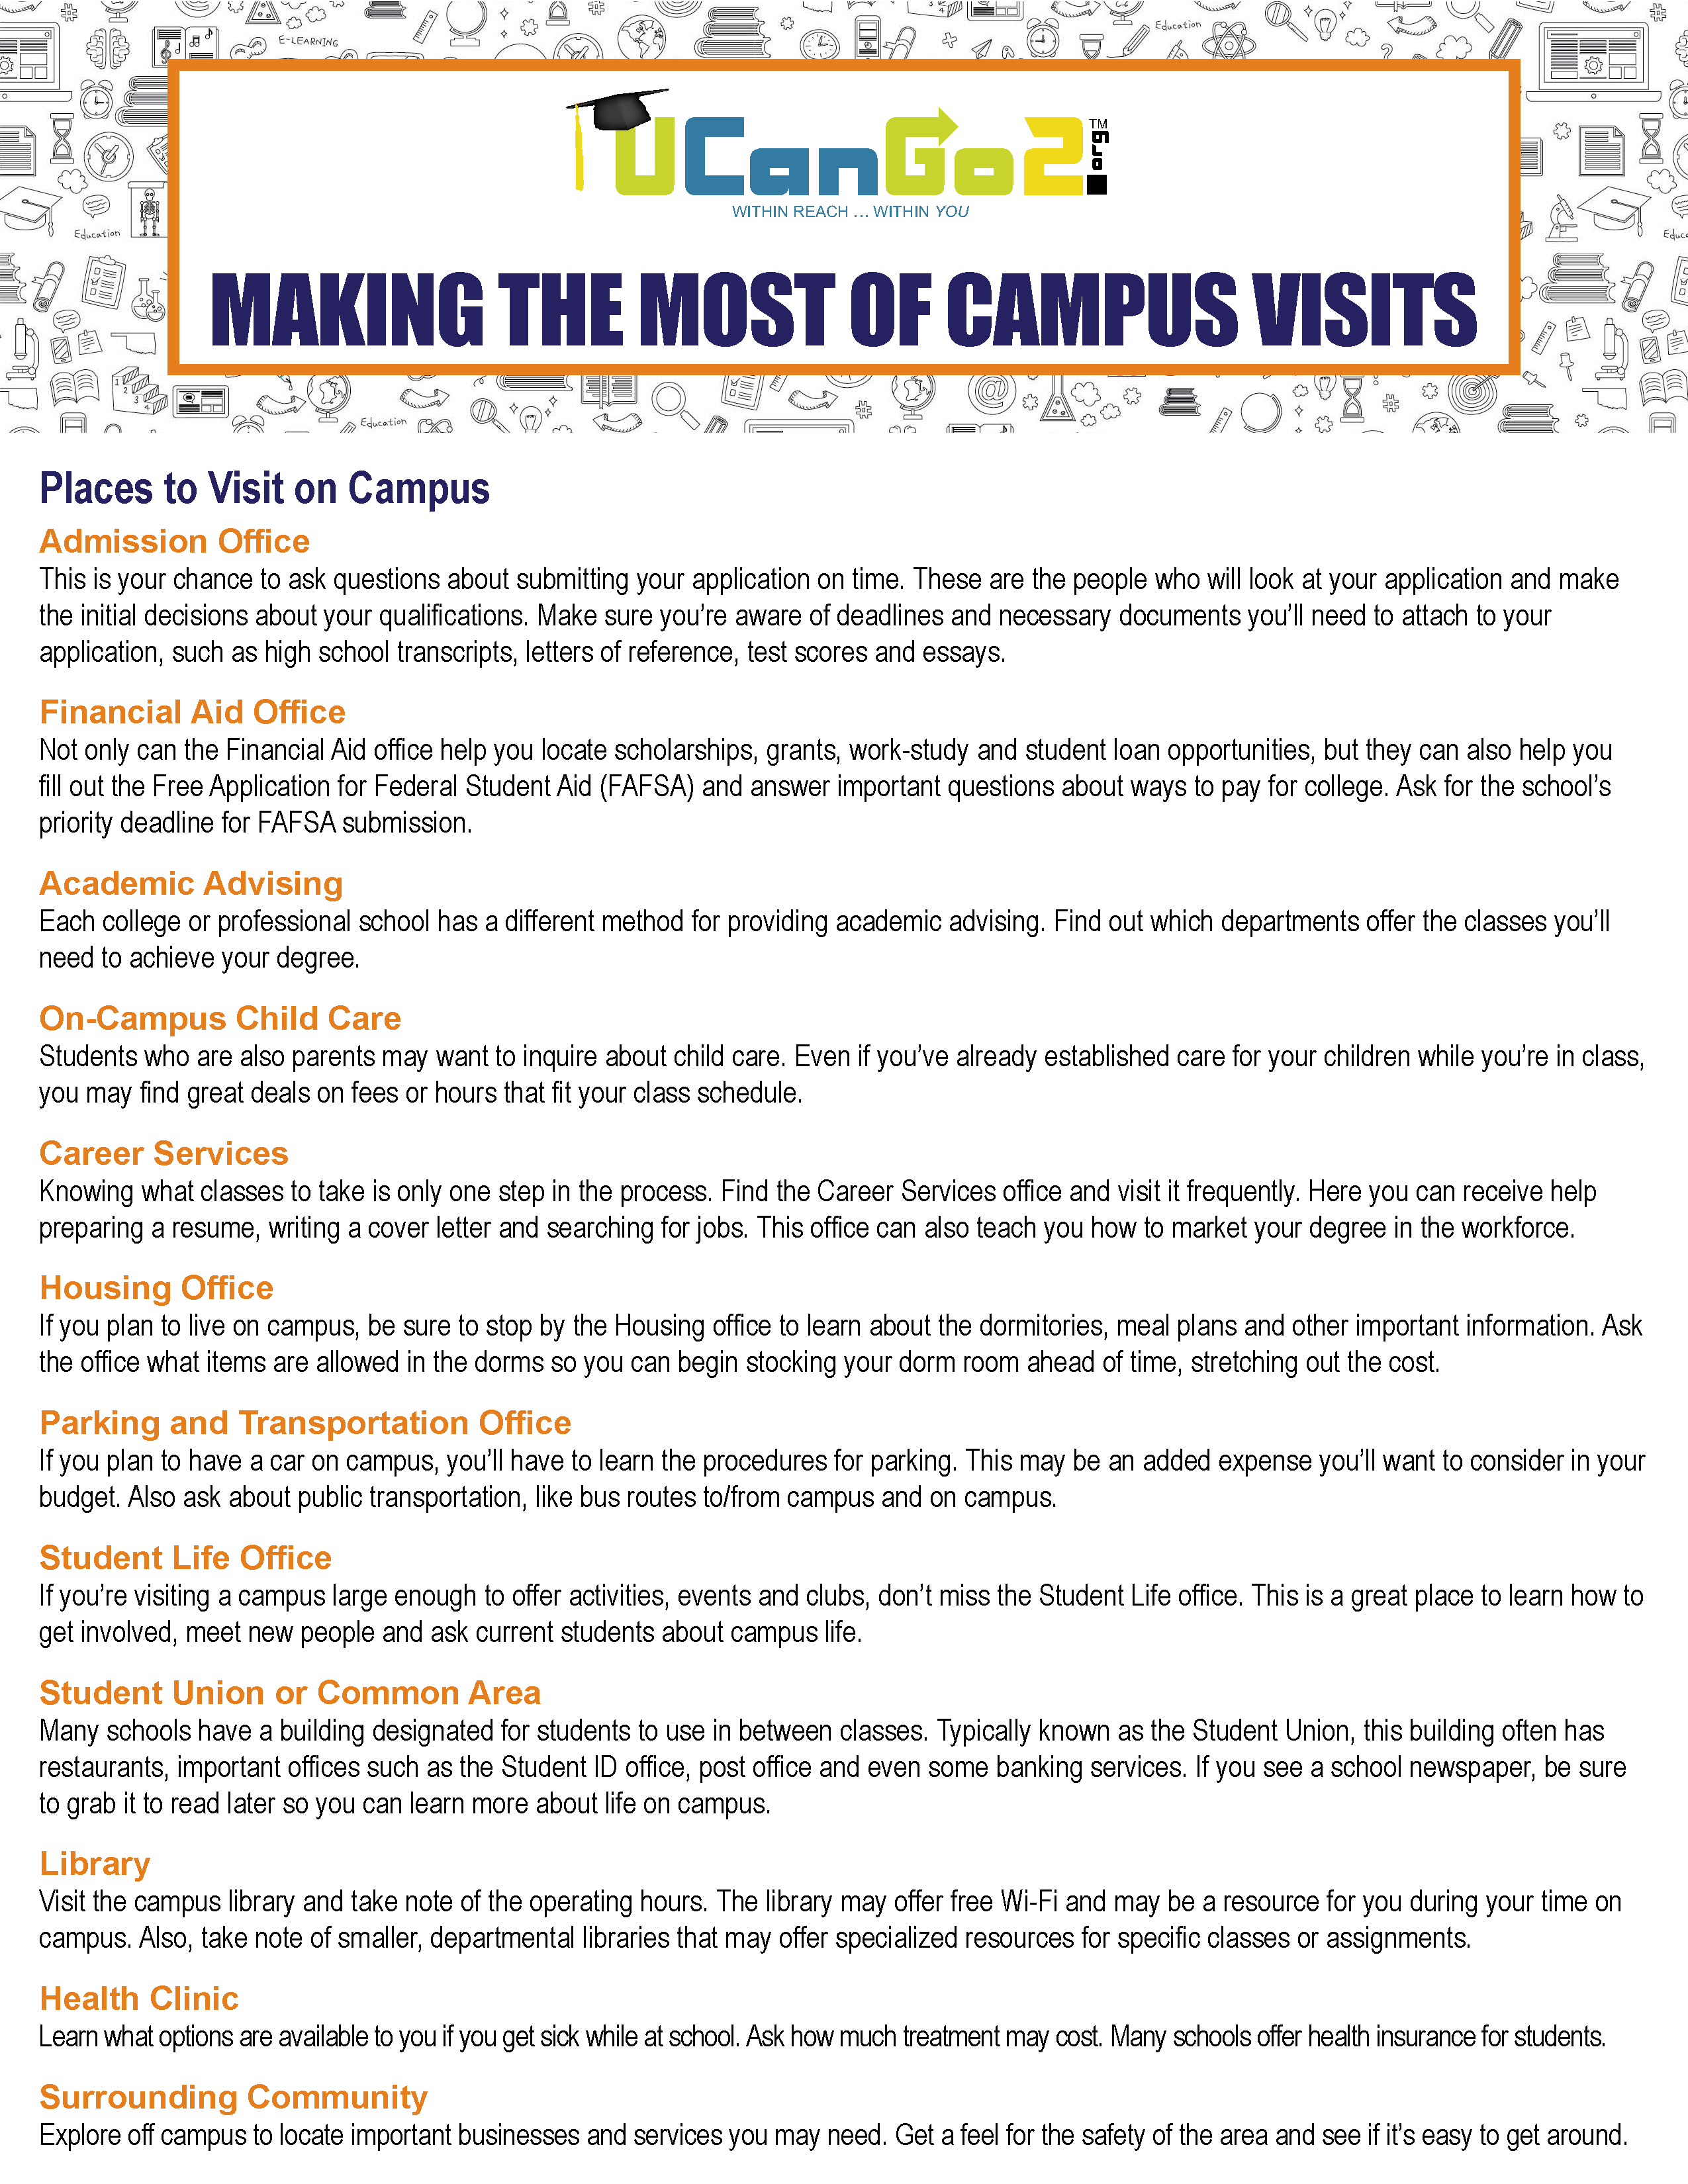 PDf of Making the Most of Campus Visits opens in a new tab